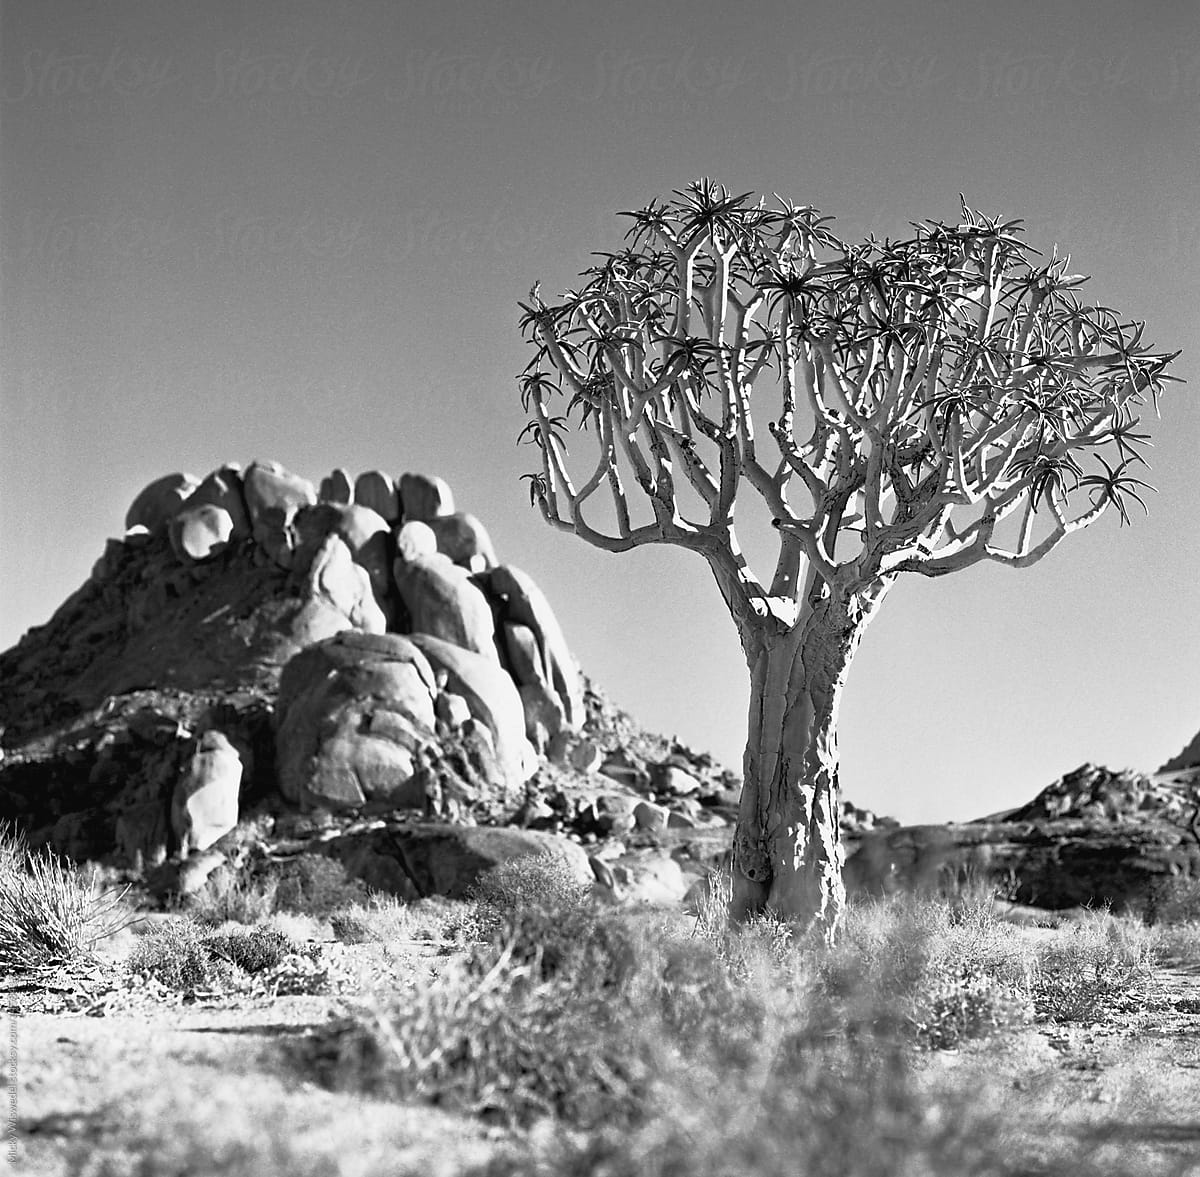 black and whiteQuiver tree in a desert landscape